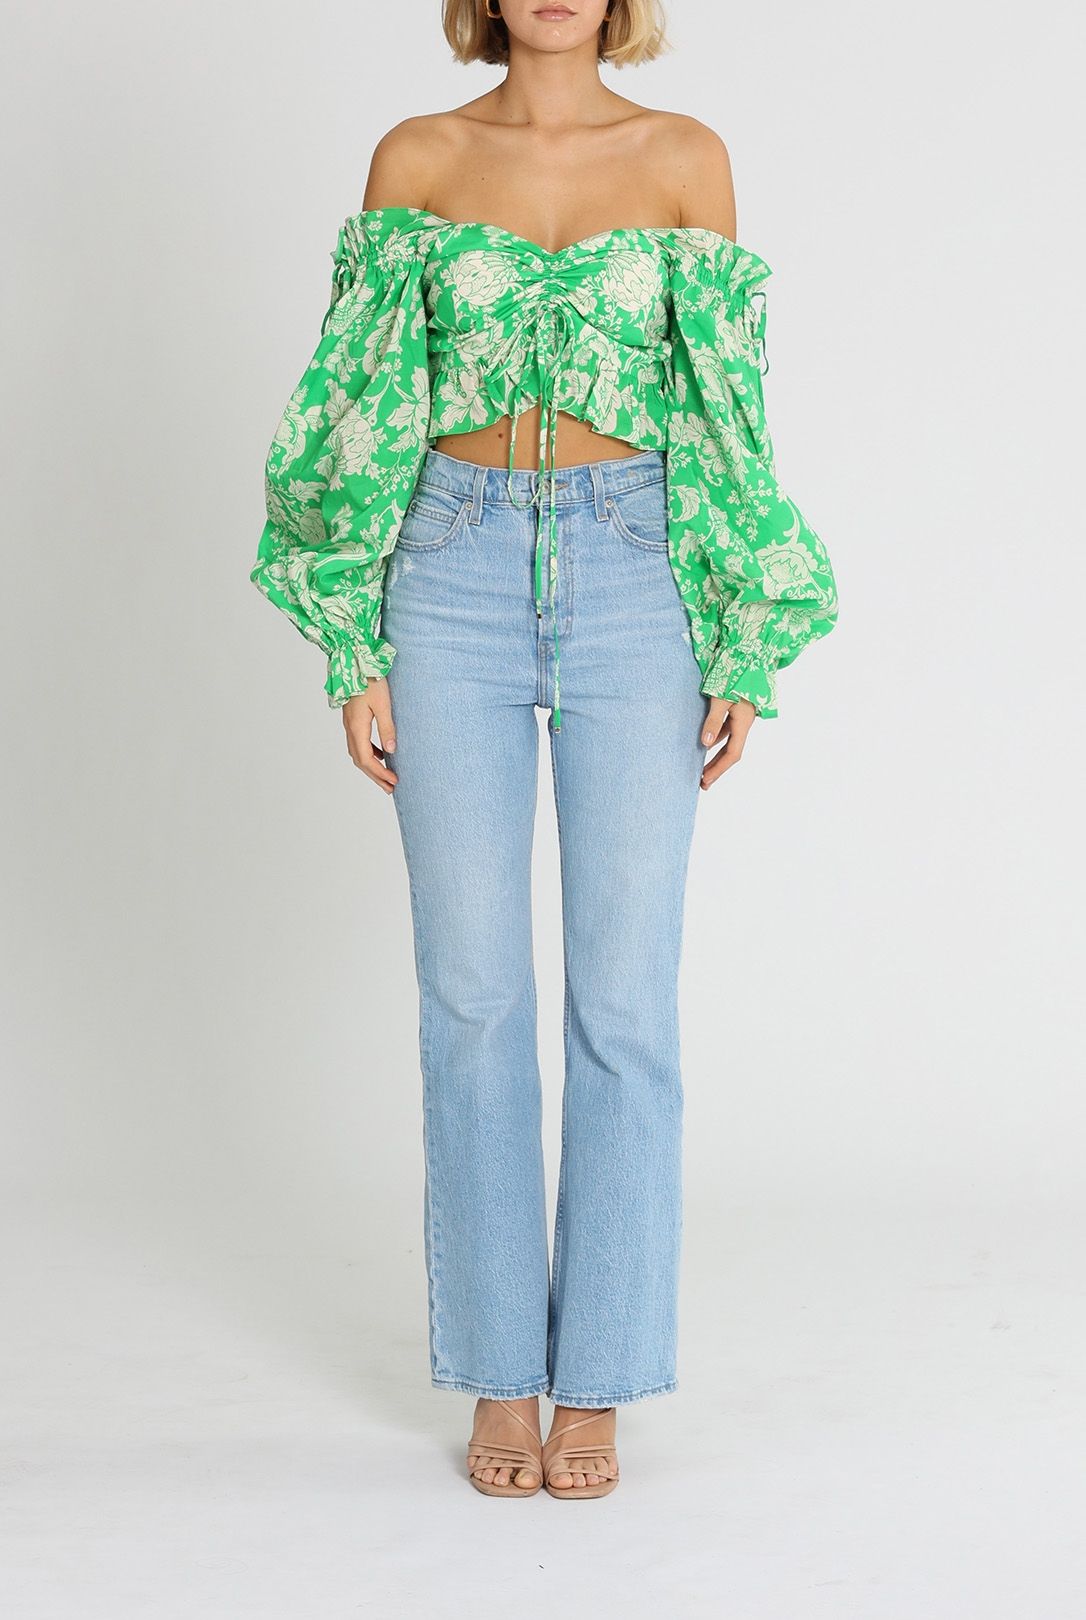 Alice McCall Mary Anne Crop Top Floral